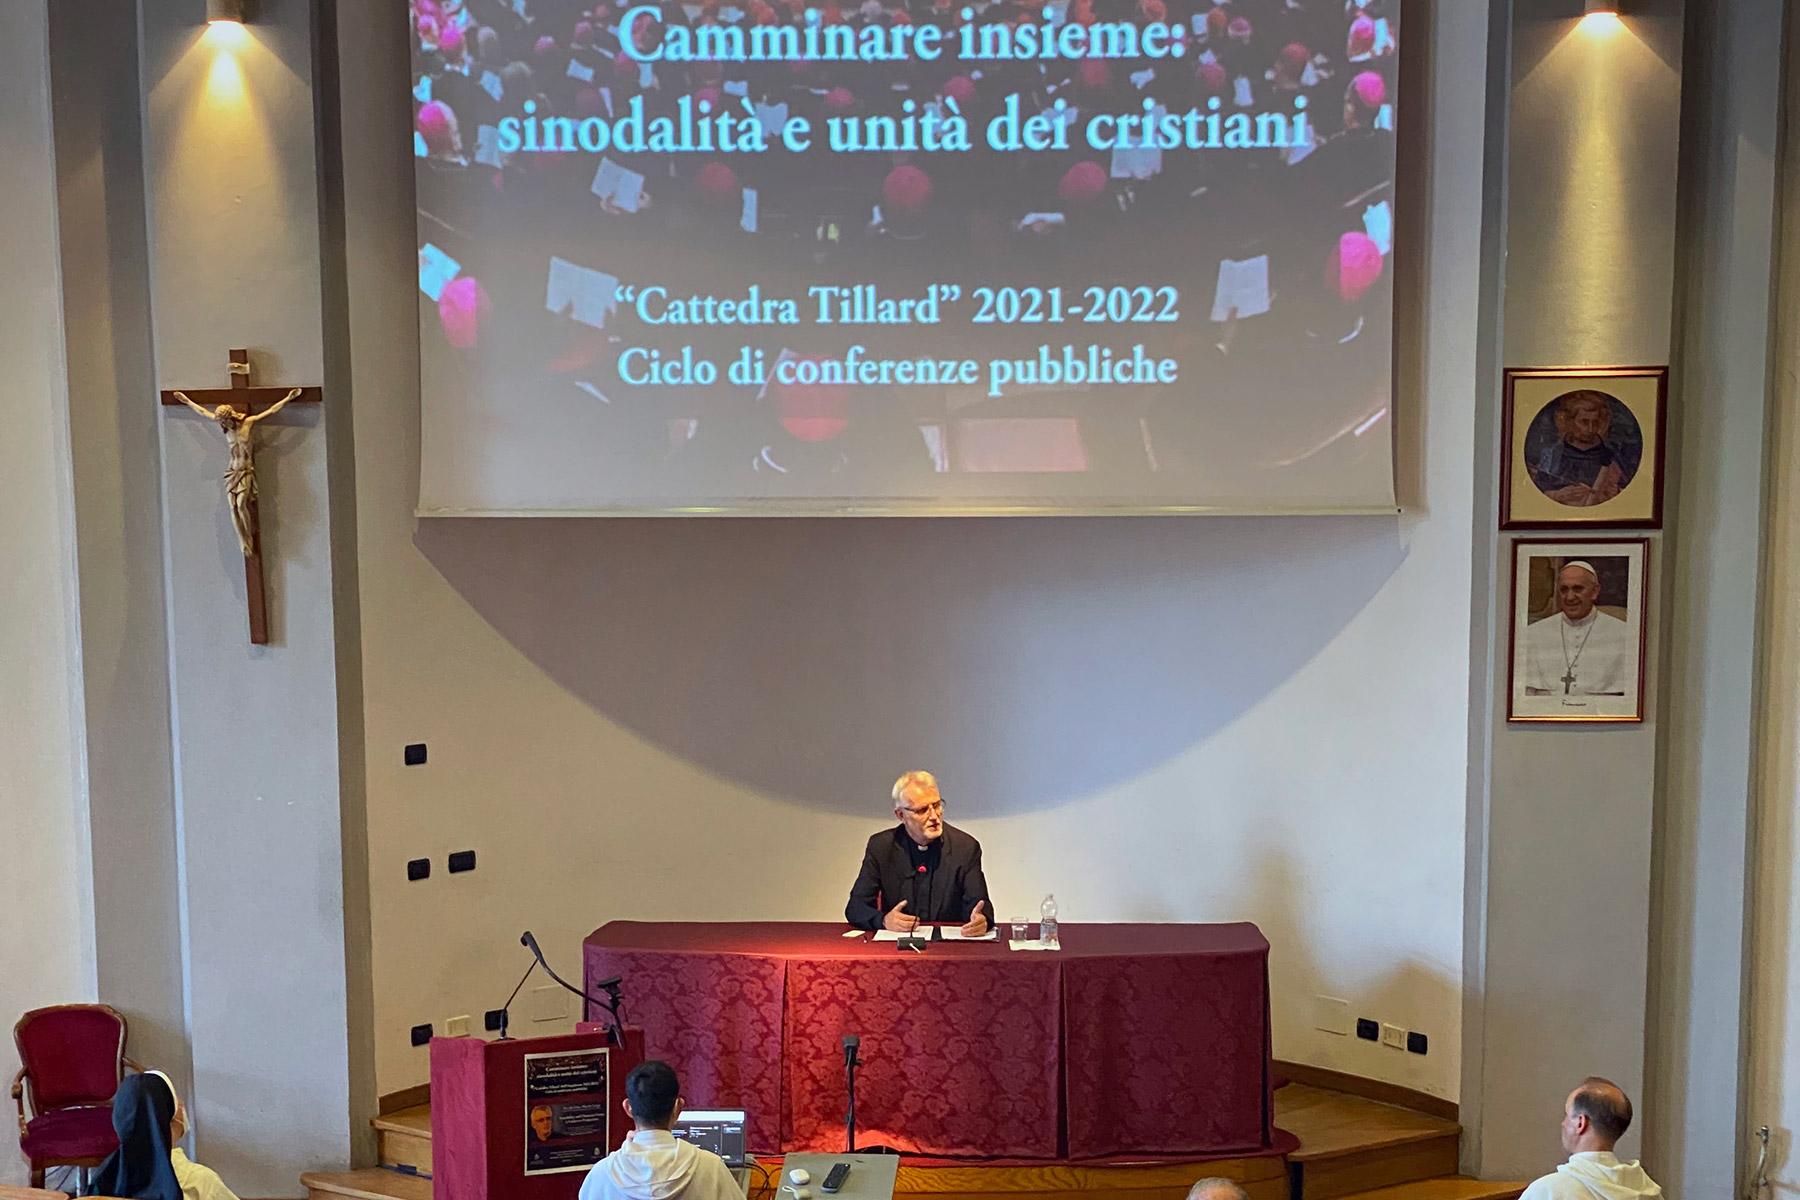 LWF General Secretary Rev. Dr Martin Junge delivers a lecture at the Pontifical University of St Thomas Aquinas (Angelicum) on Synodality and Christian Unity from a Lutheran perspective. Photo: LWF/A. Danielsson 